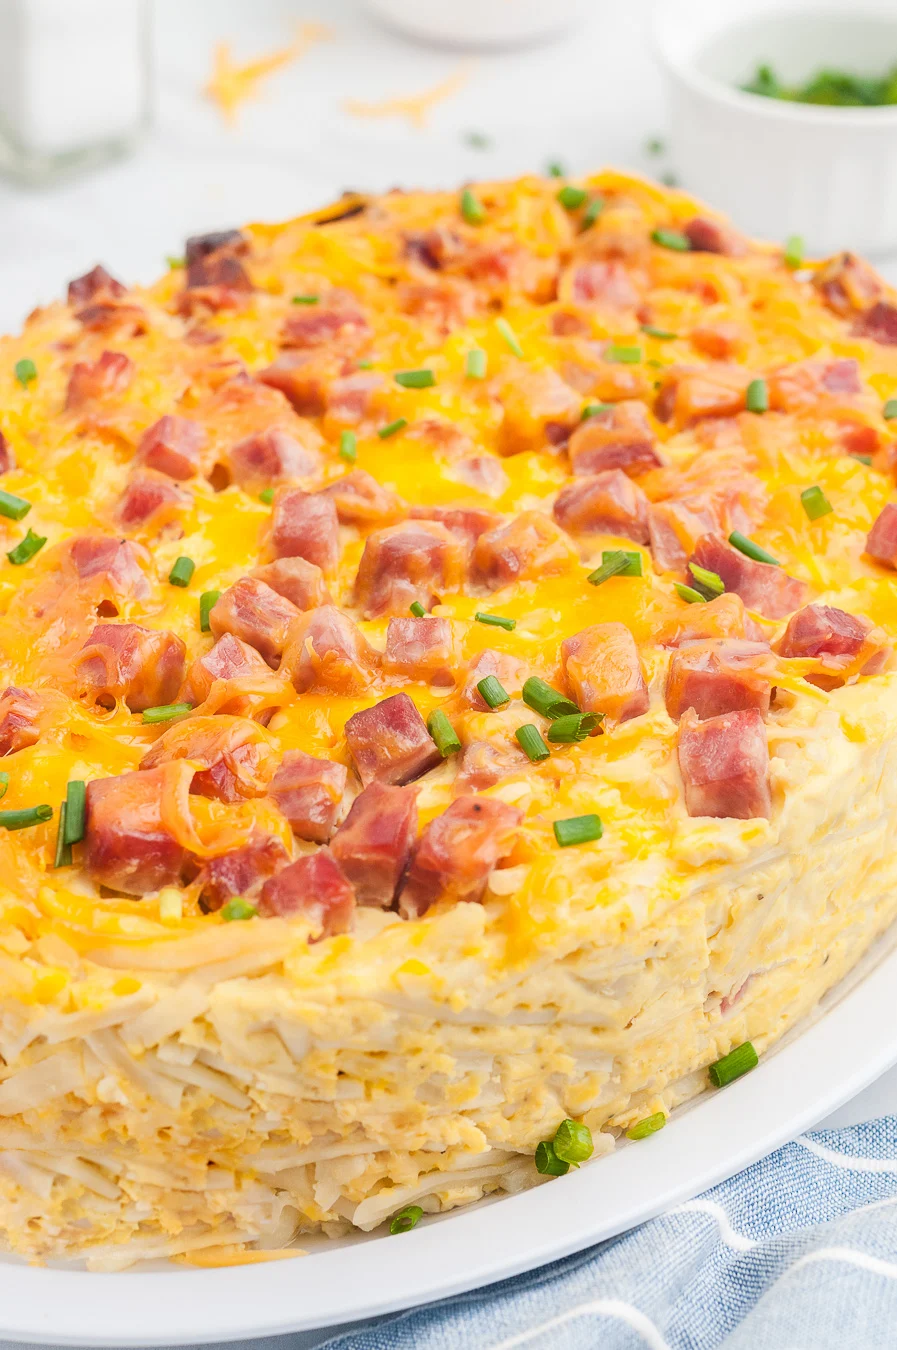 Ham and cheddar breakfast casserole prepared in an oval slow cooker, placed onto a plate for serving.